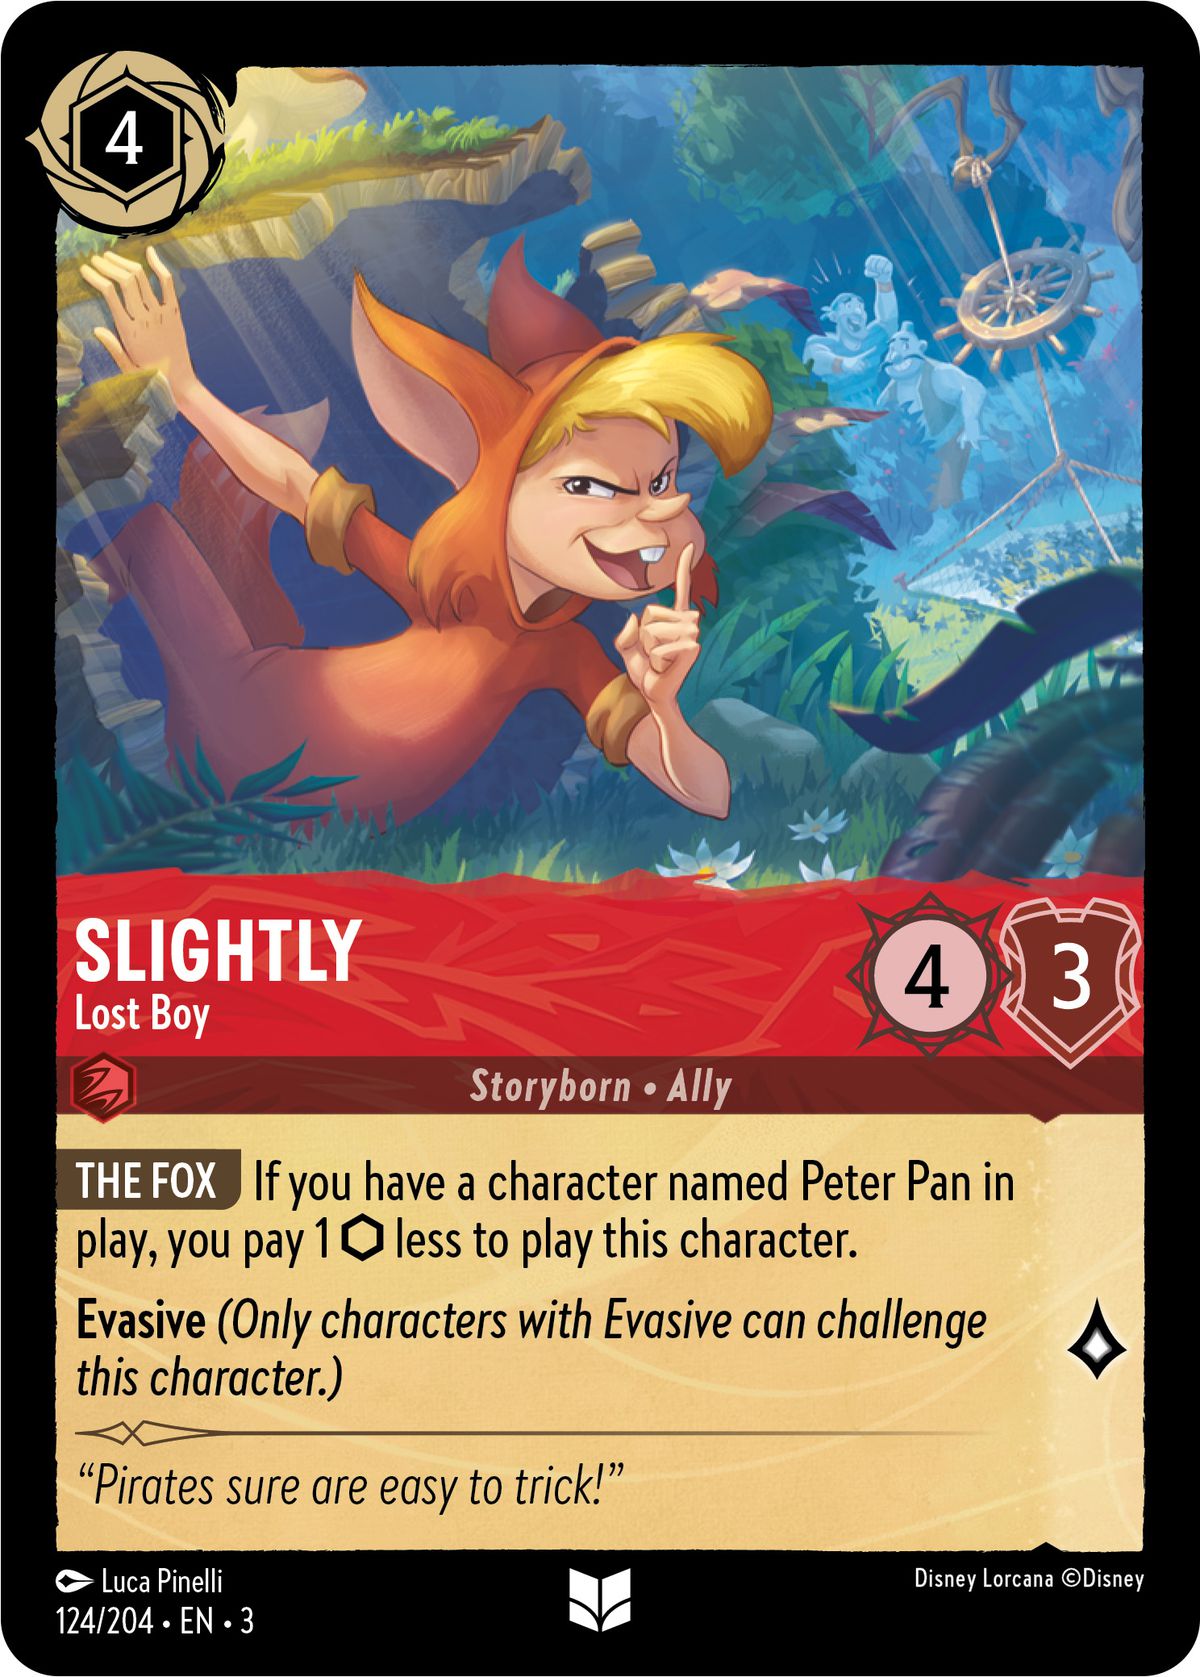 Slightly, Lost Boy is a 4 ink, 4/3 card that costs less to cast when Peter Pan is in play. He’s also evasive, with one lore.